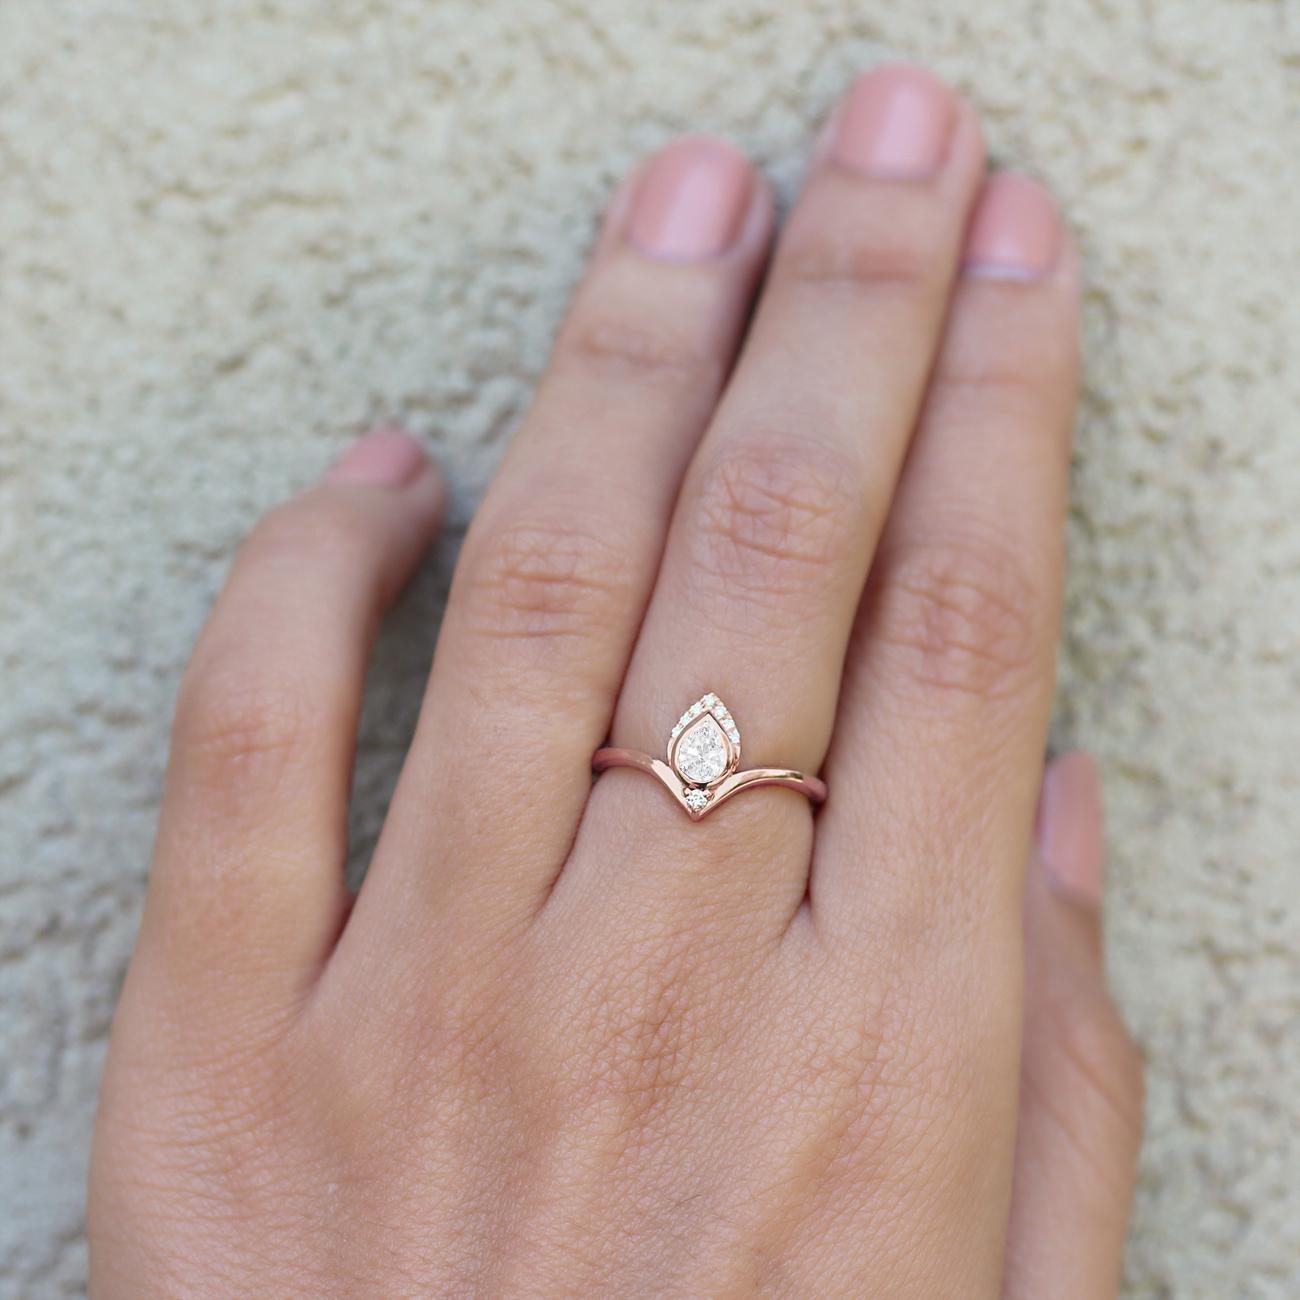 Beautiful and unique pear diamond gold engagement ring 'Atyasha.'
Diamonds are carefully selected, clean white, and high quality, with ideal cut proportions and ratio.
An original design by Silly Shiny Diamonds.

Details:
♥ Center stone: Natural